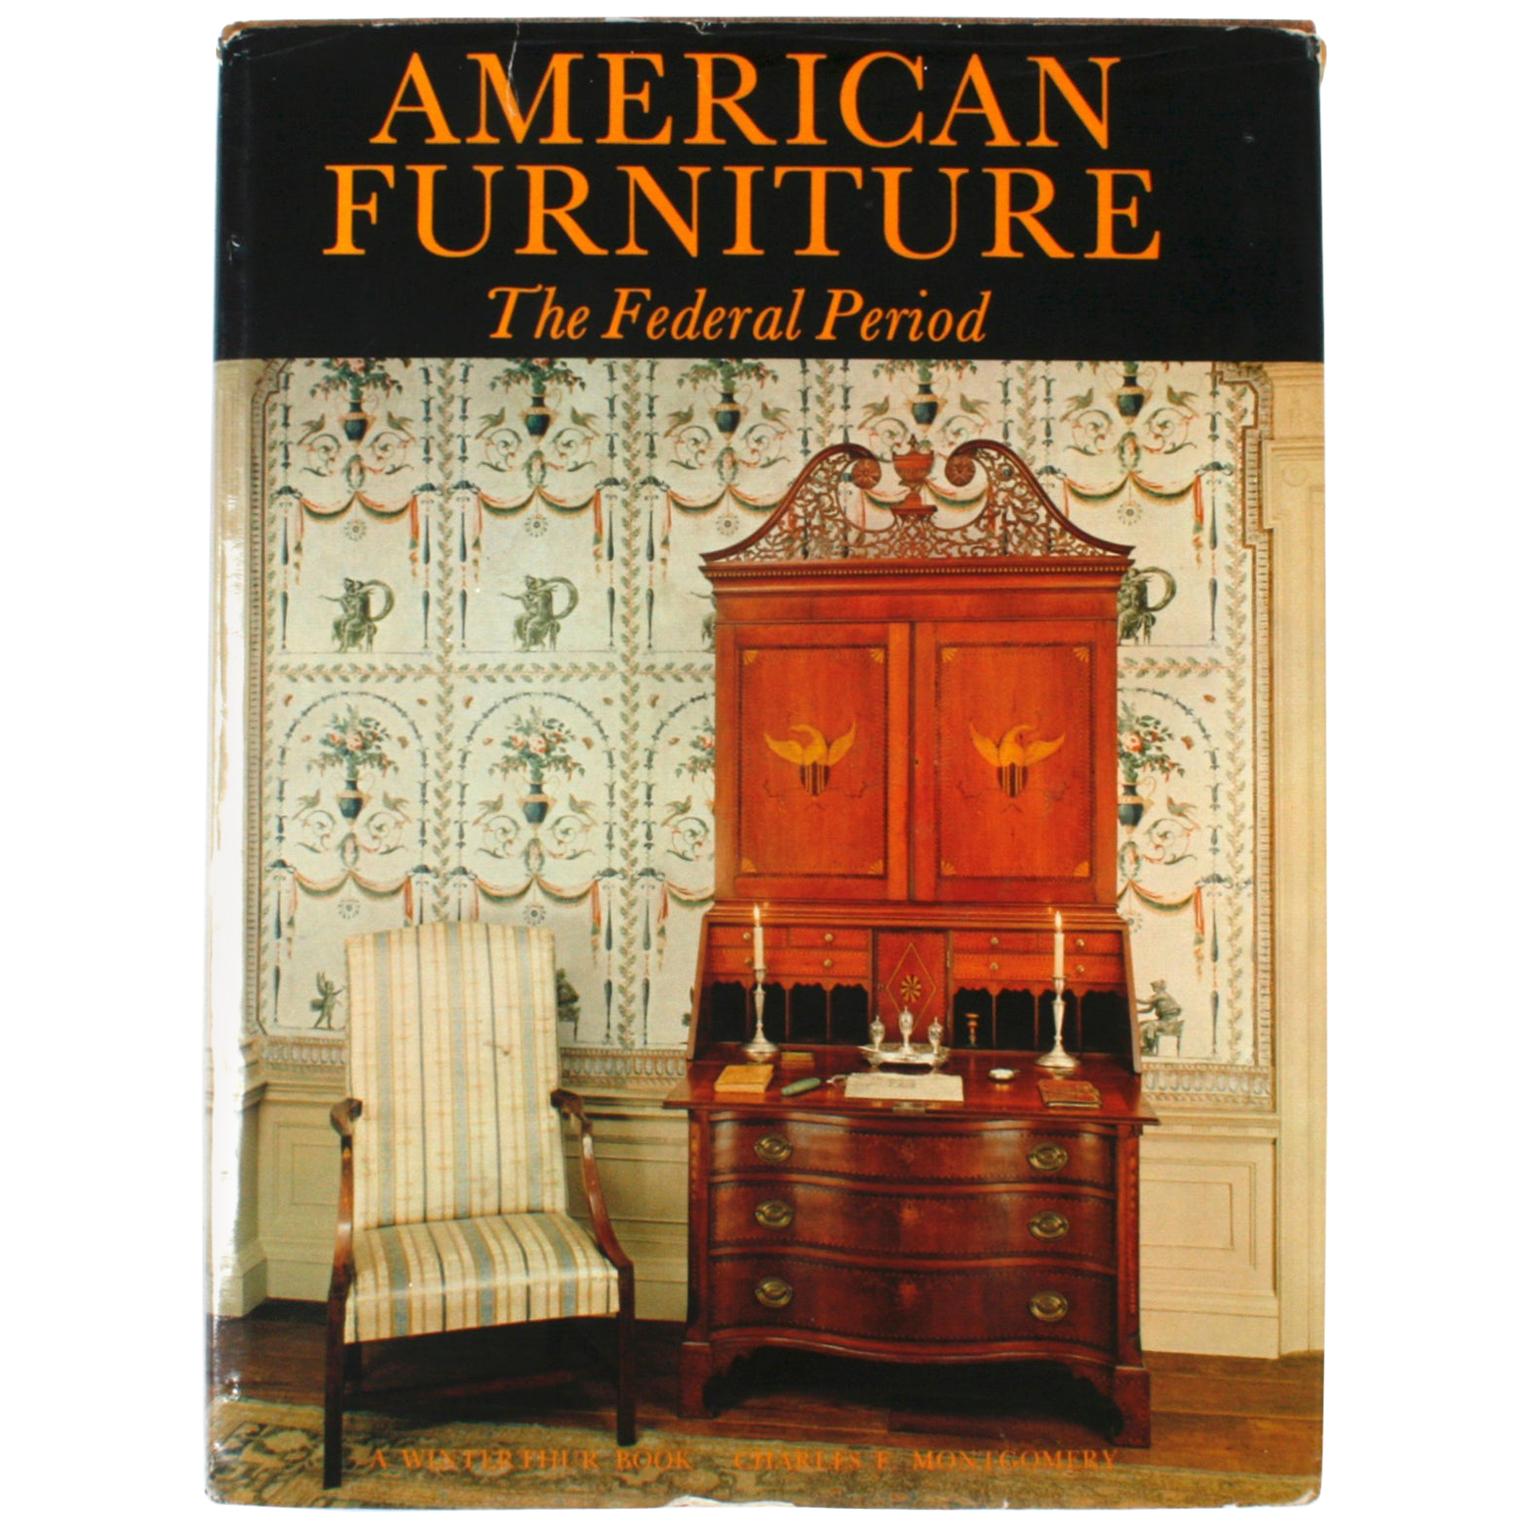 American Furniture, The Federal Period by Charles F. Montgomery